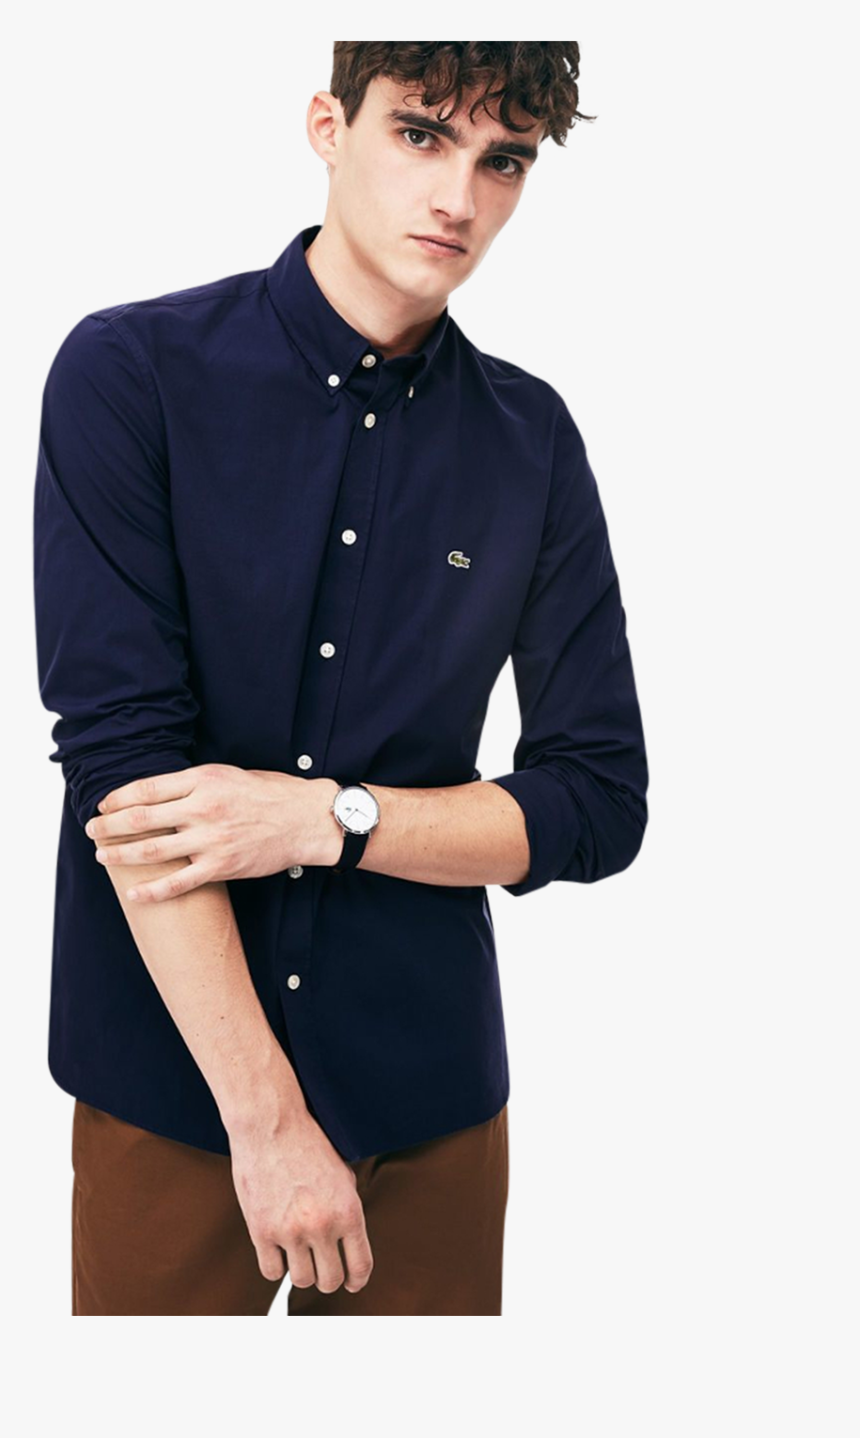 lacoste formal shirts